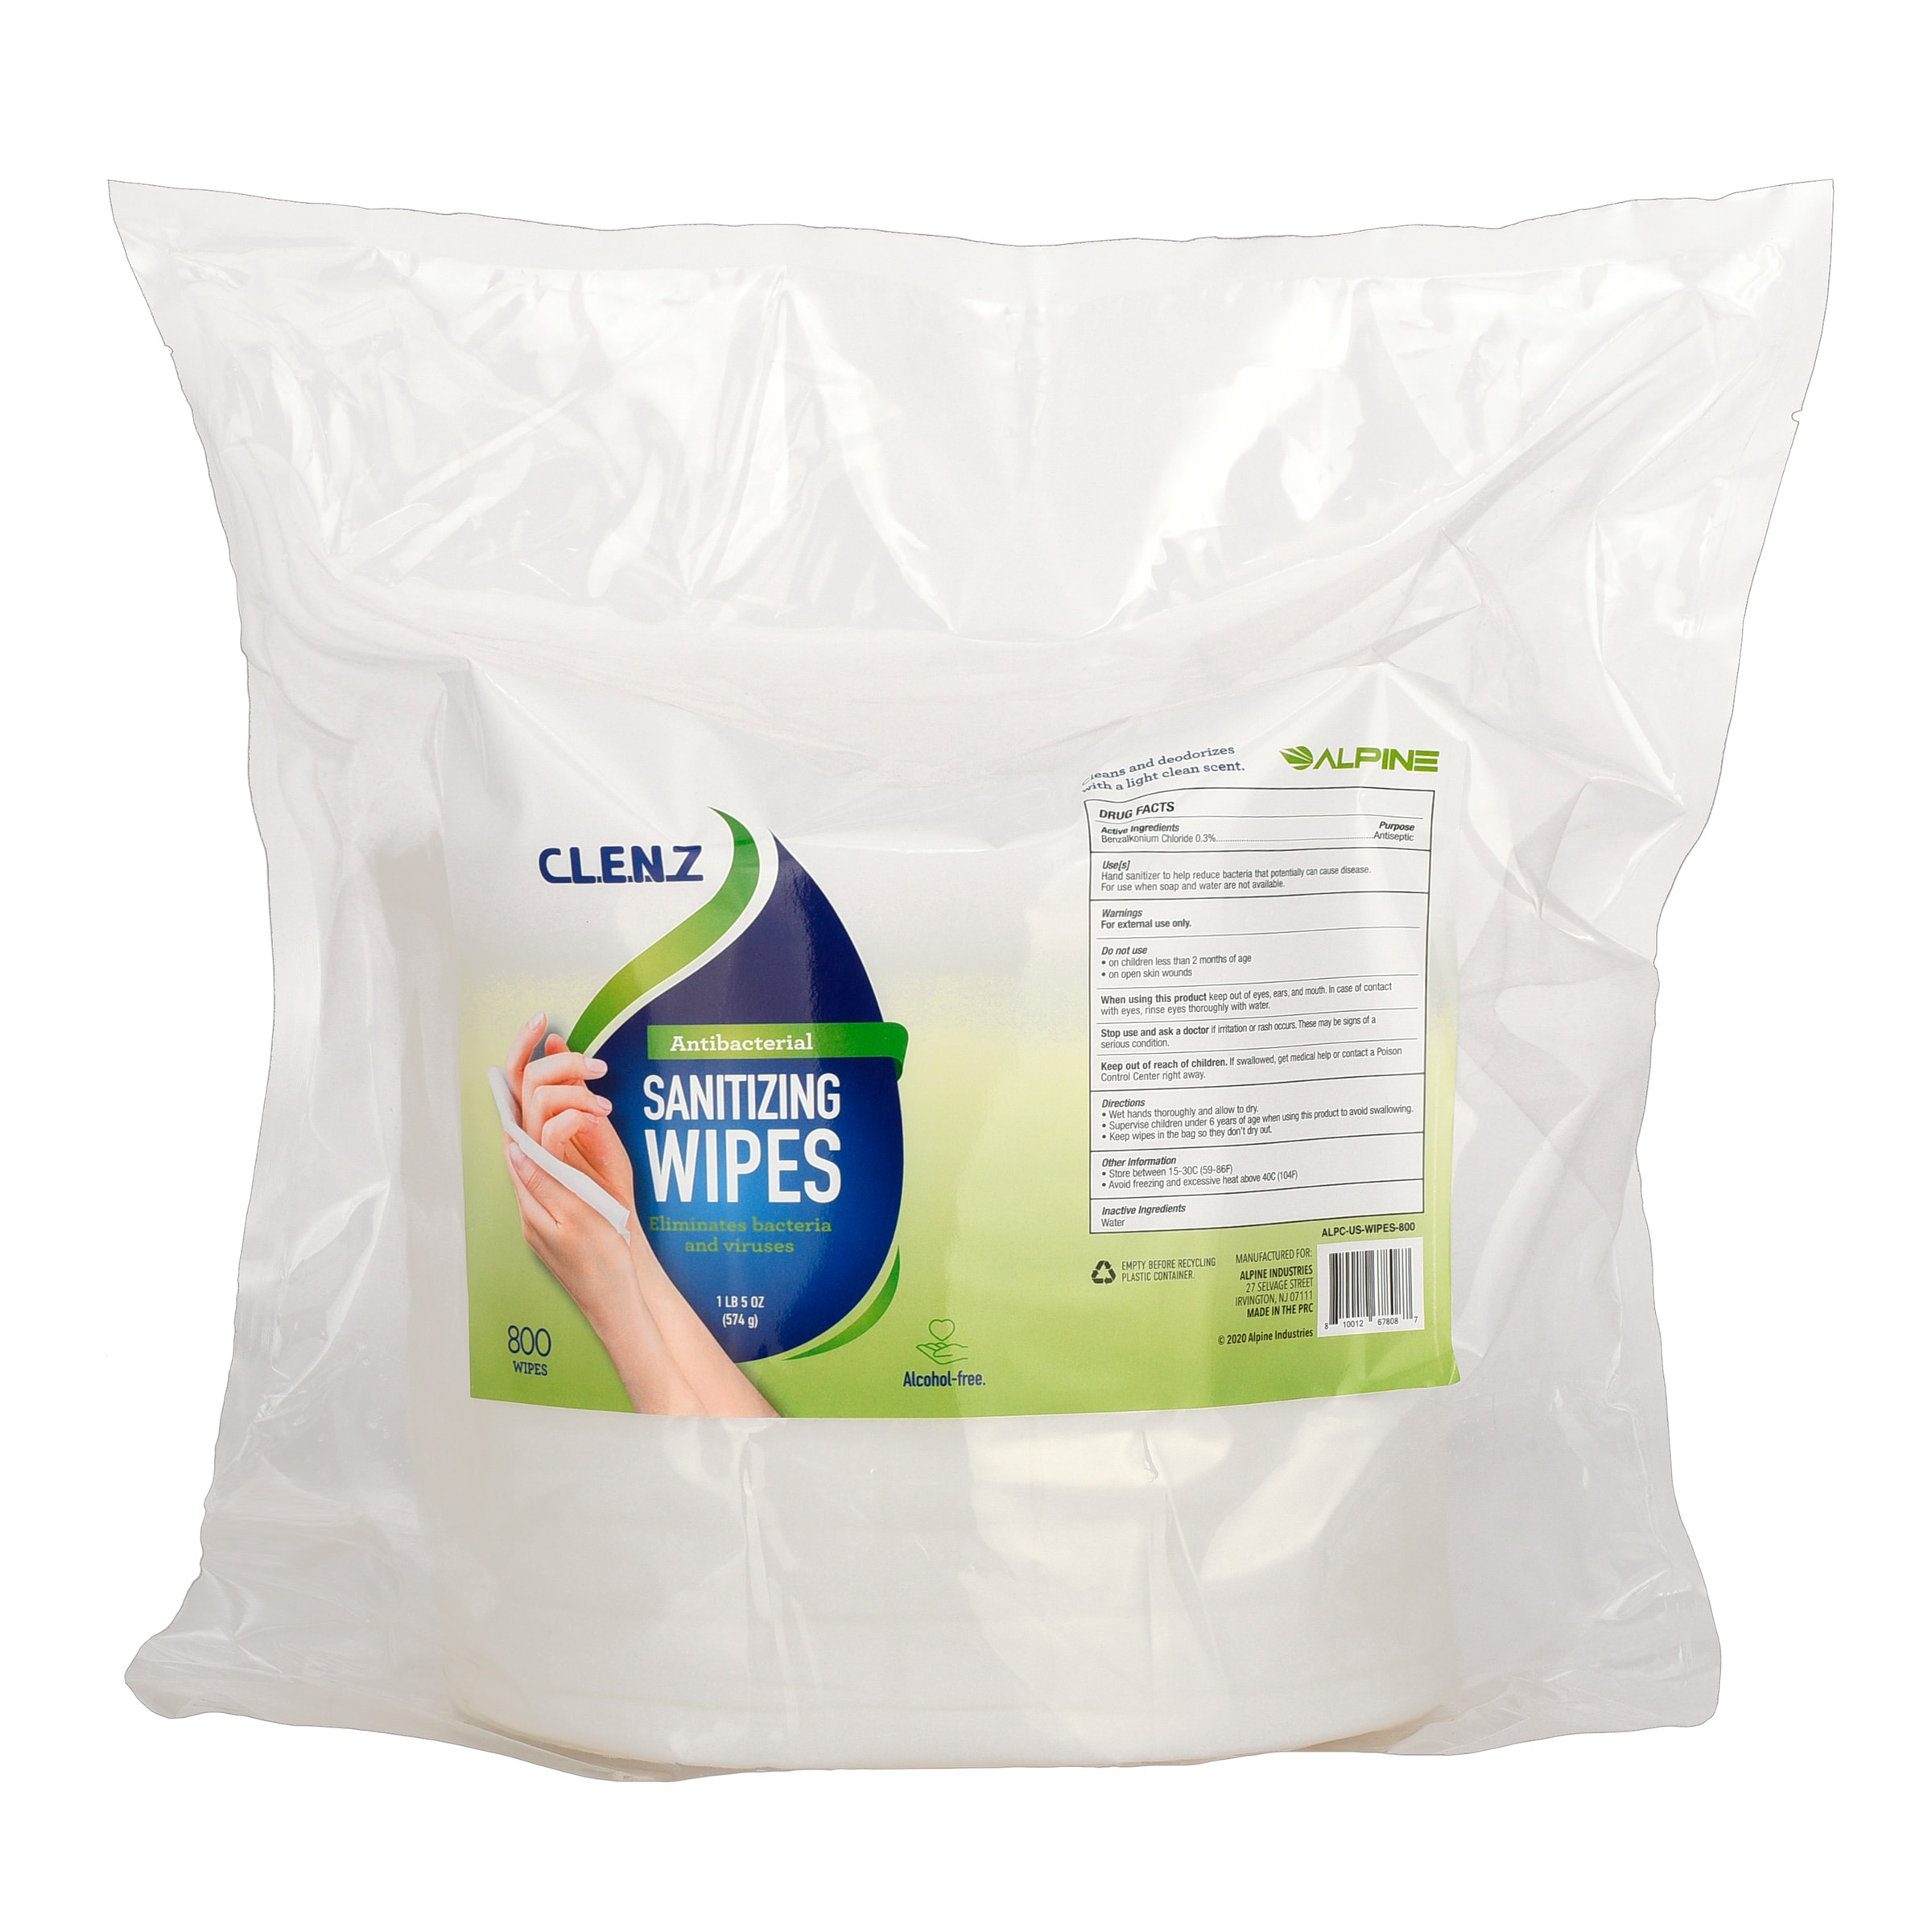 Windex Glass and Multi-Surface Cleaning Wipes, 28 Count - Pack of 3 (84  Total Wipes) - Tissue Paper